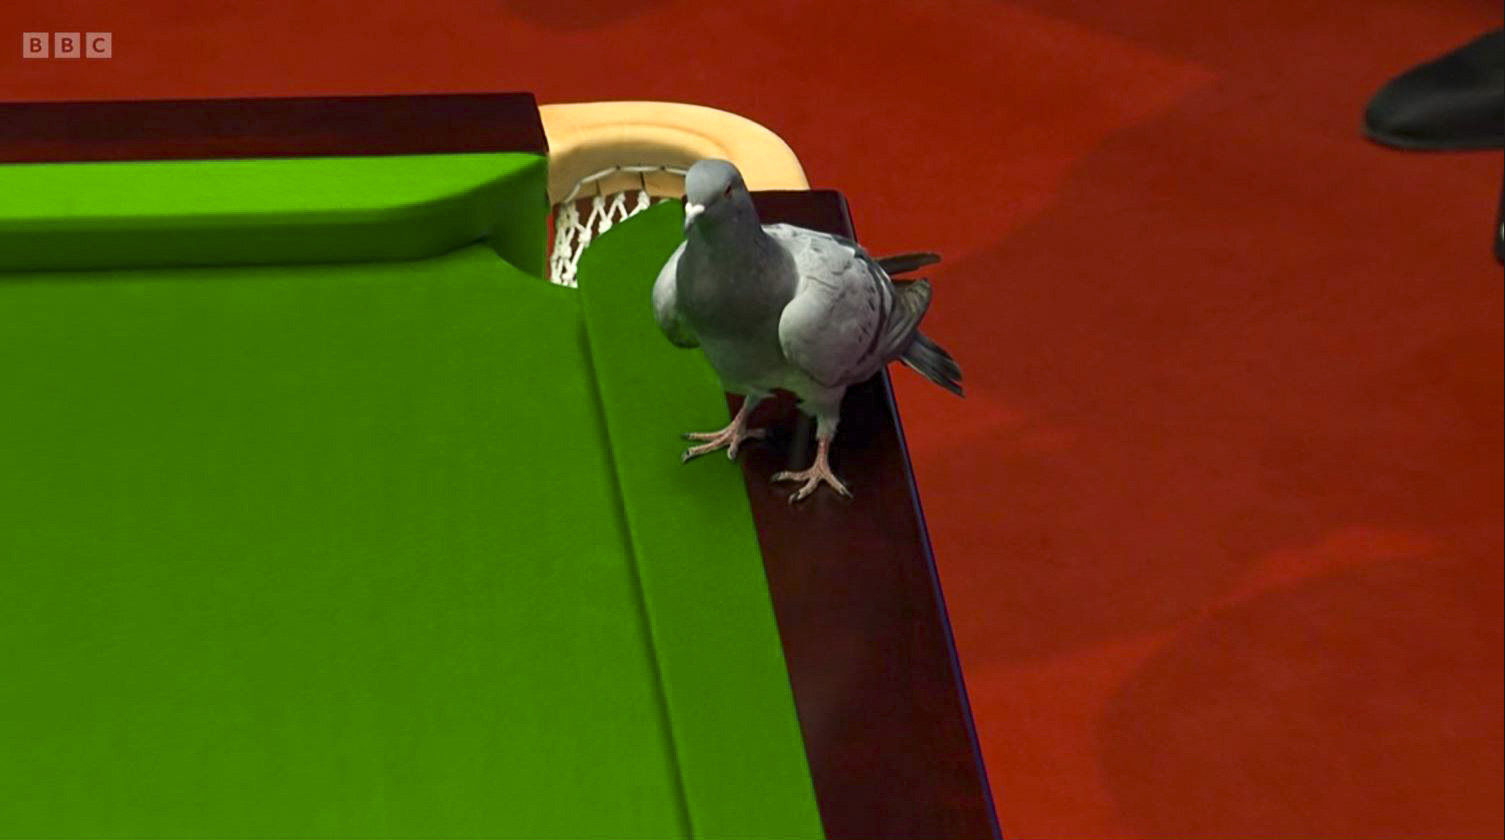 The pigeon caused a stir at the Crucible when it landed on the match table. Photo: BBC Sport